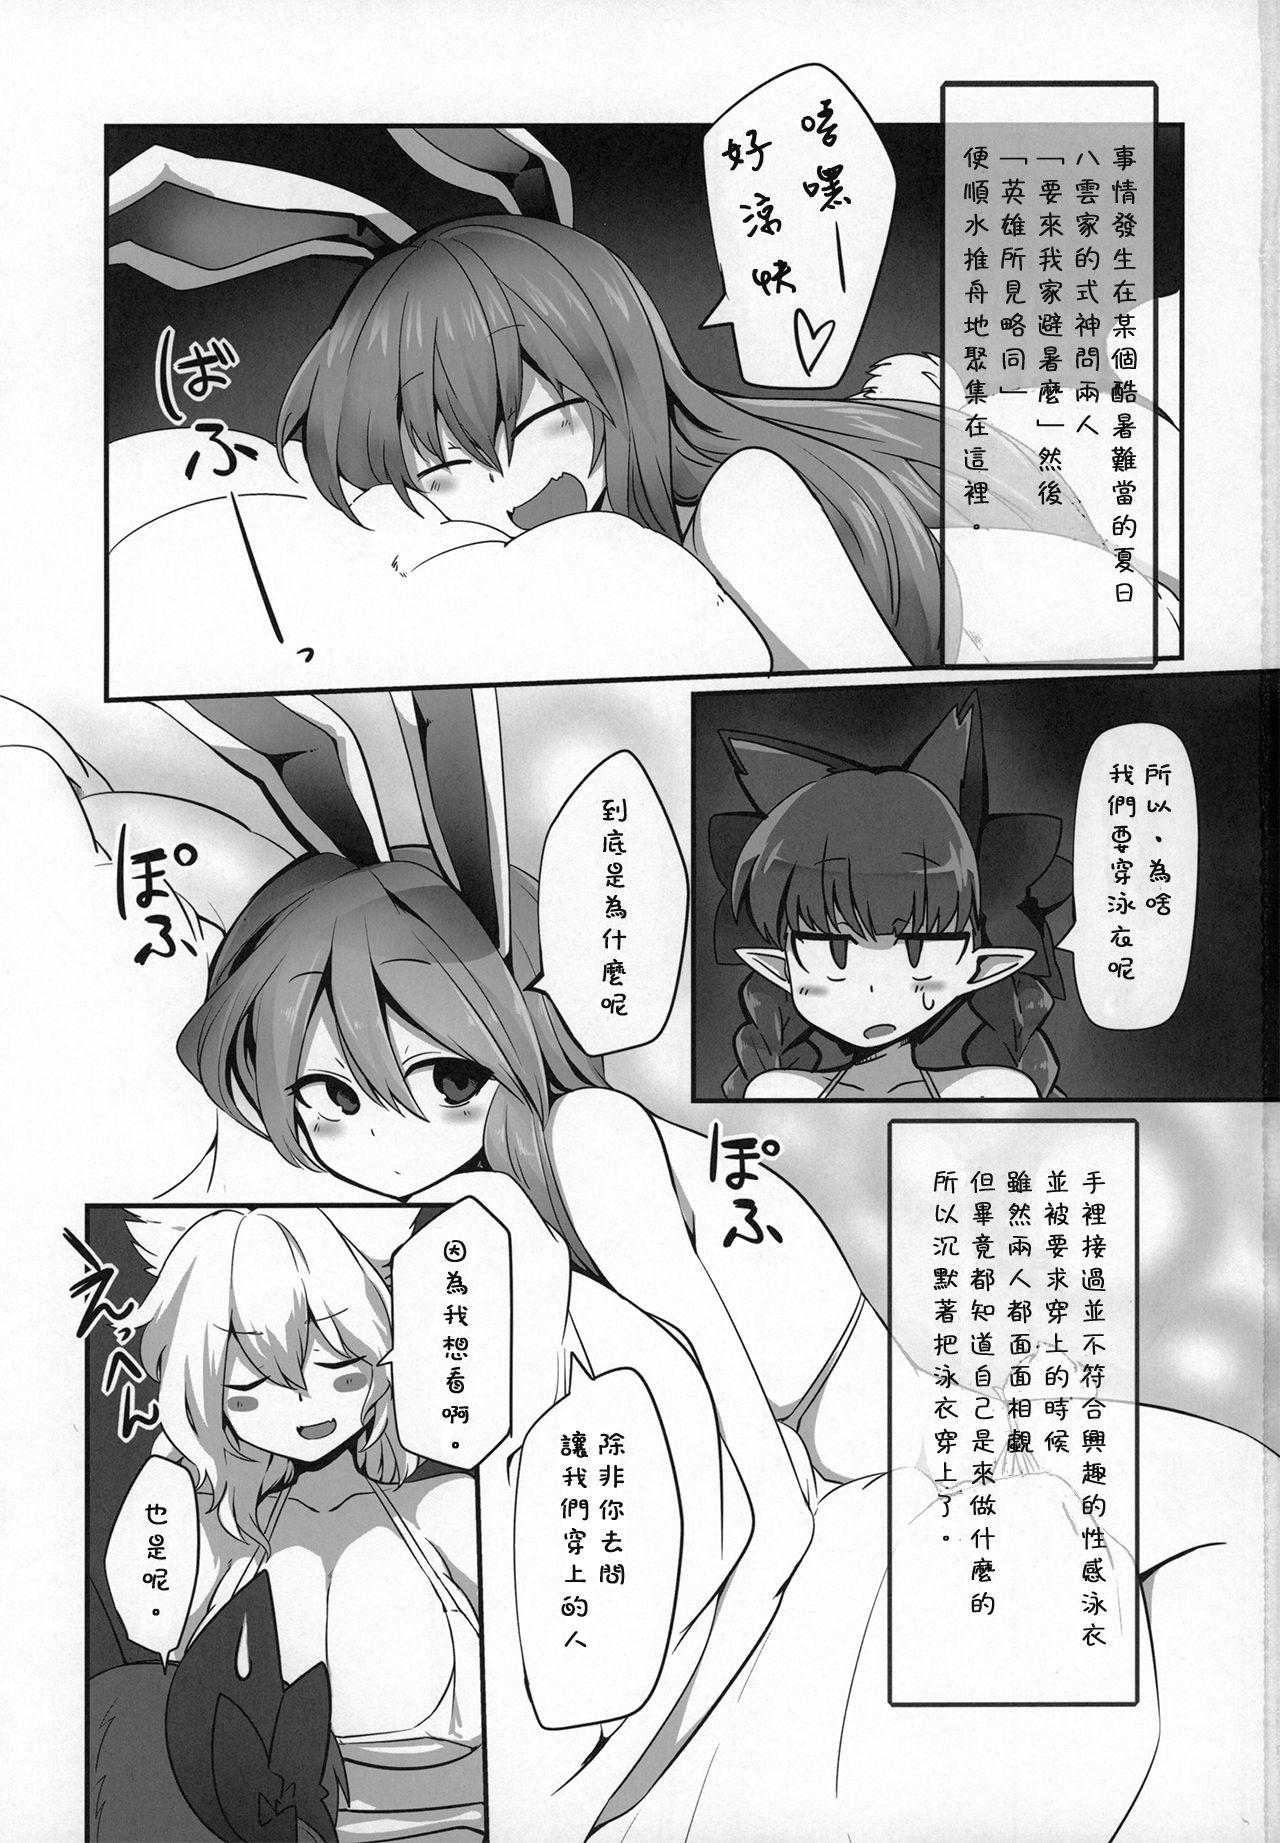 Nut MBH - Touhou project Gay Physicalexamination - Page 2